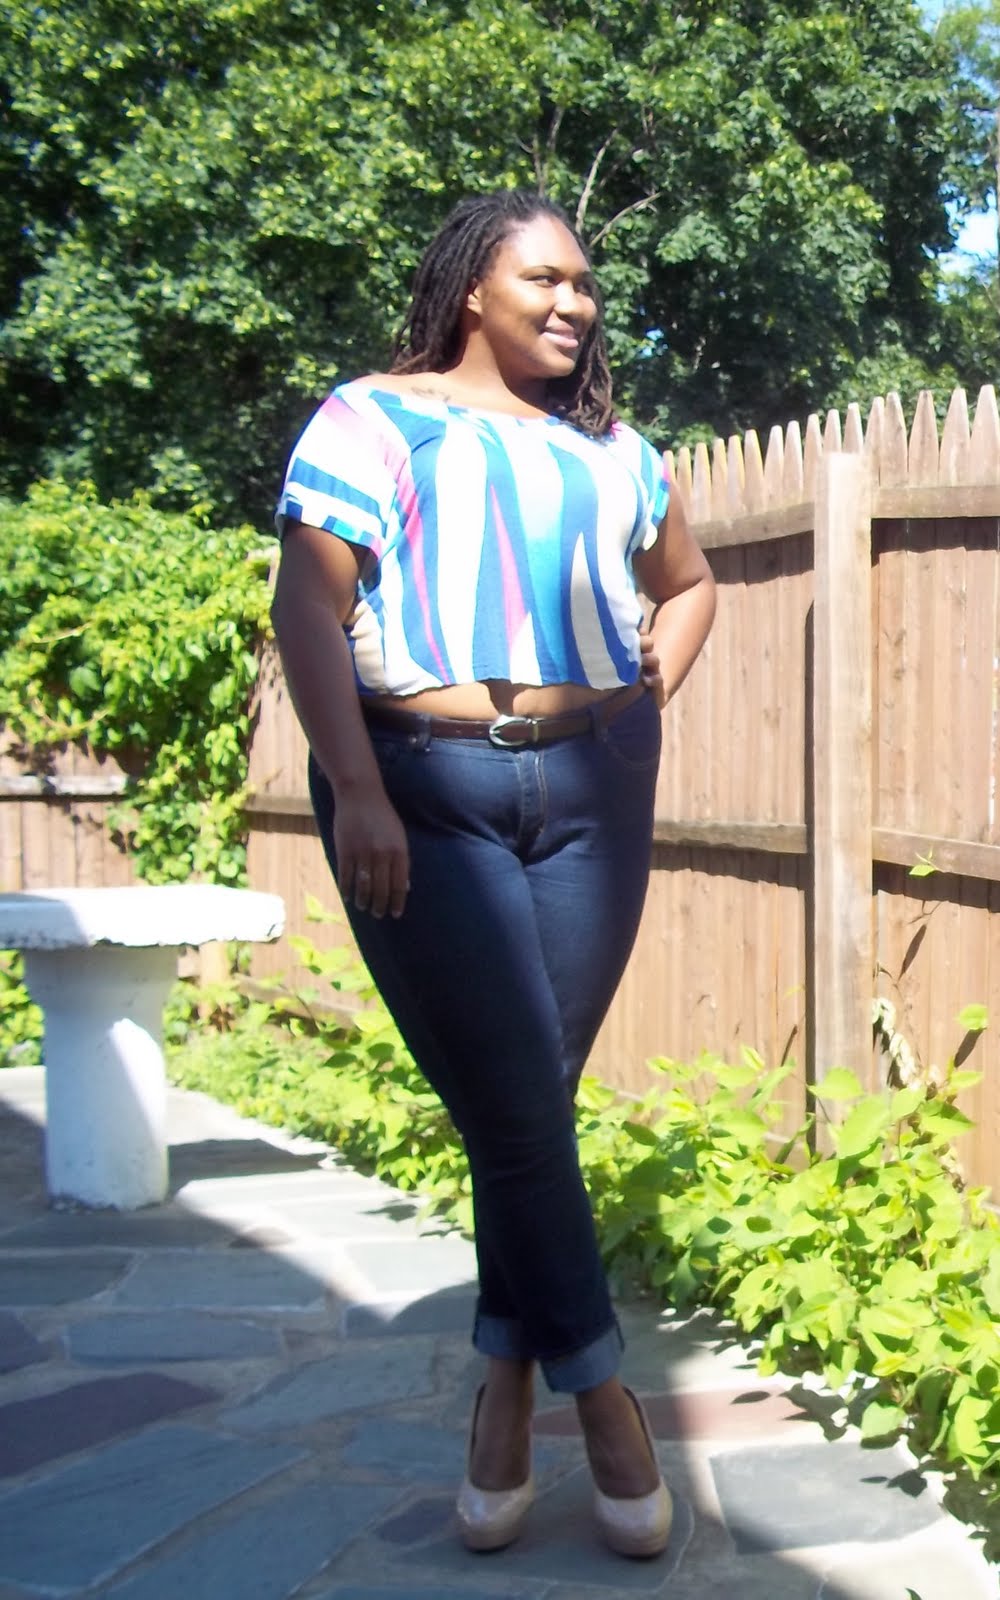 Big girl in a Crop Top..uh oh! - A Thick Girl's Closet